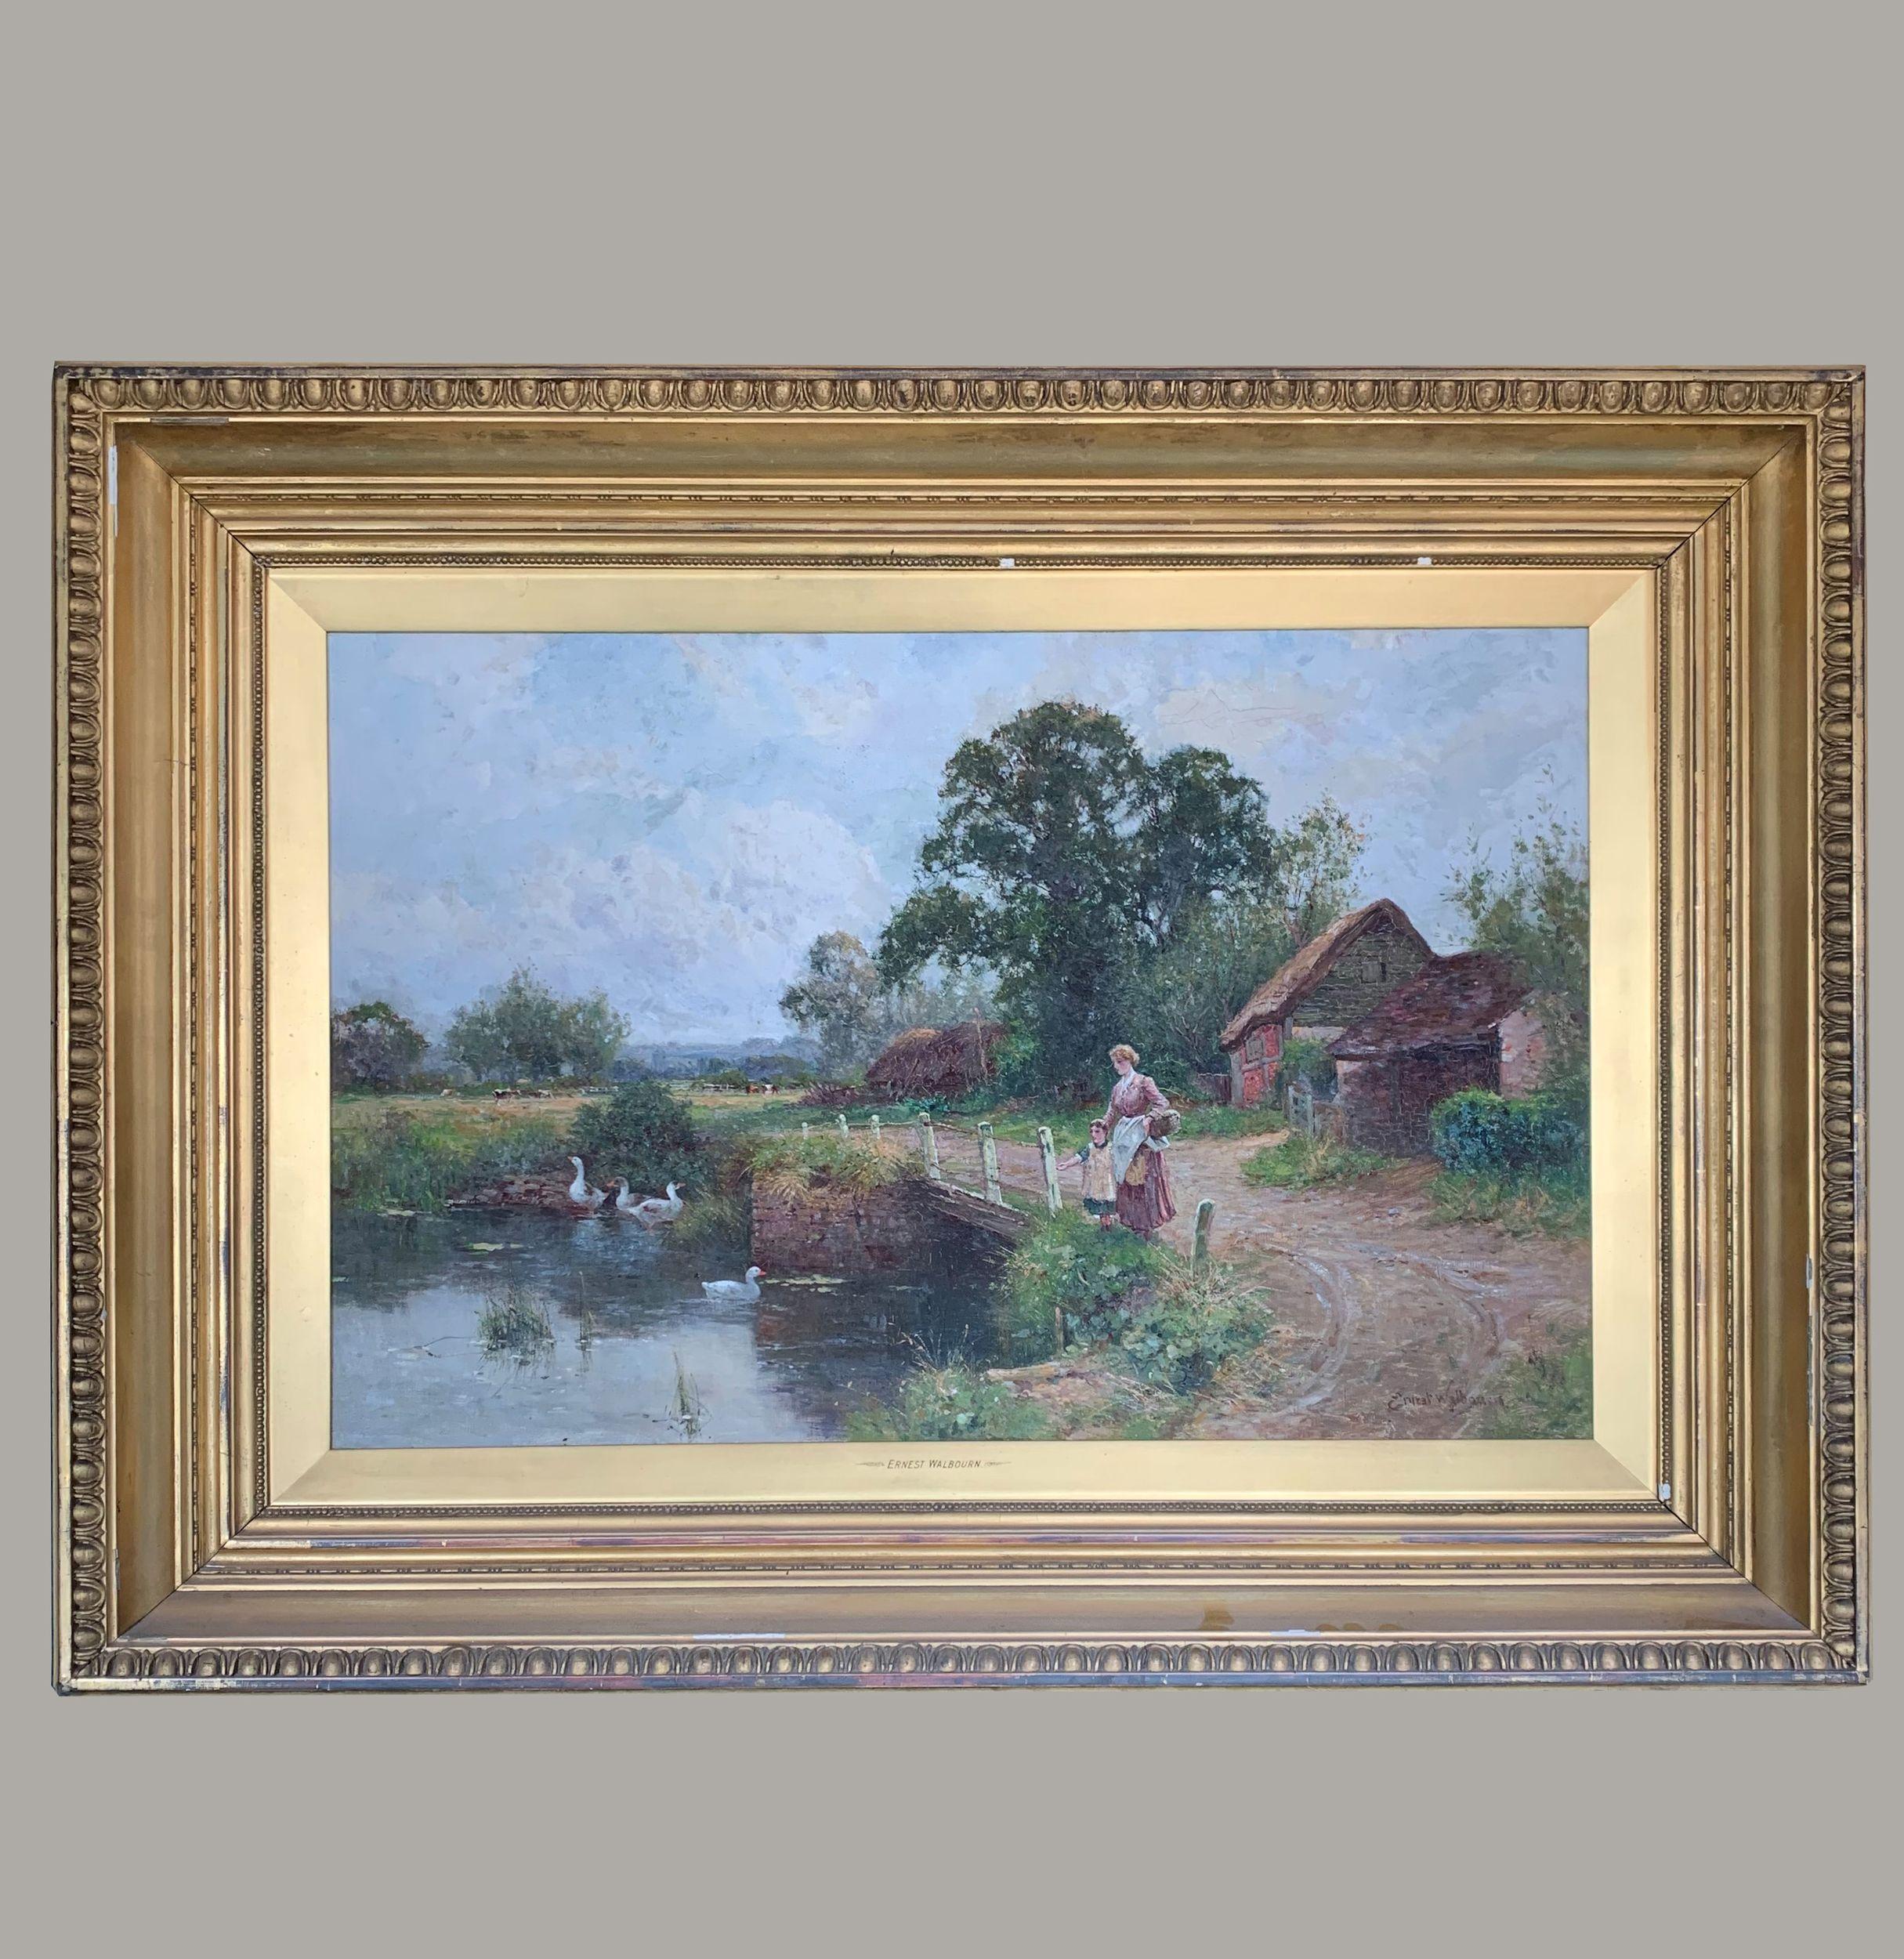 A fine and large pair of oil on canvas country landscape scenes by Ernest Charles Walbourne, 1872 - 1927. Canvas size: 29.25 x 19.25 inches.

Provenance: Private collection, Kent. Bearing label to reverse, 